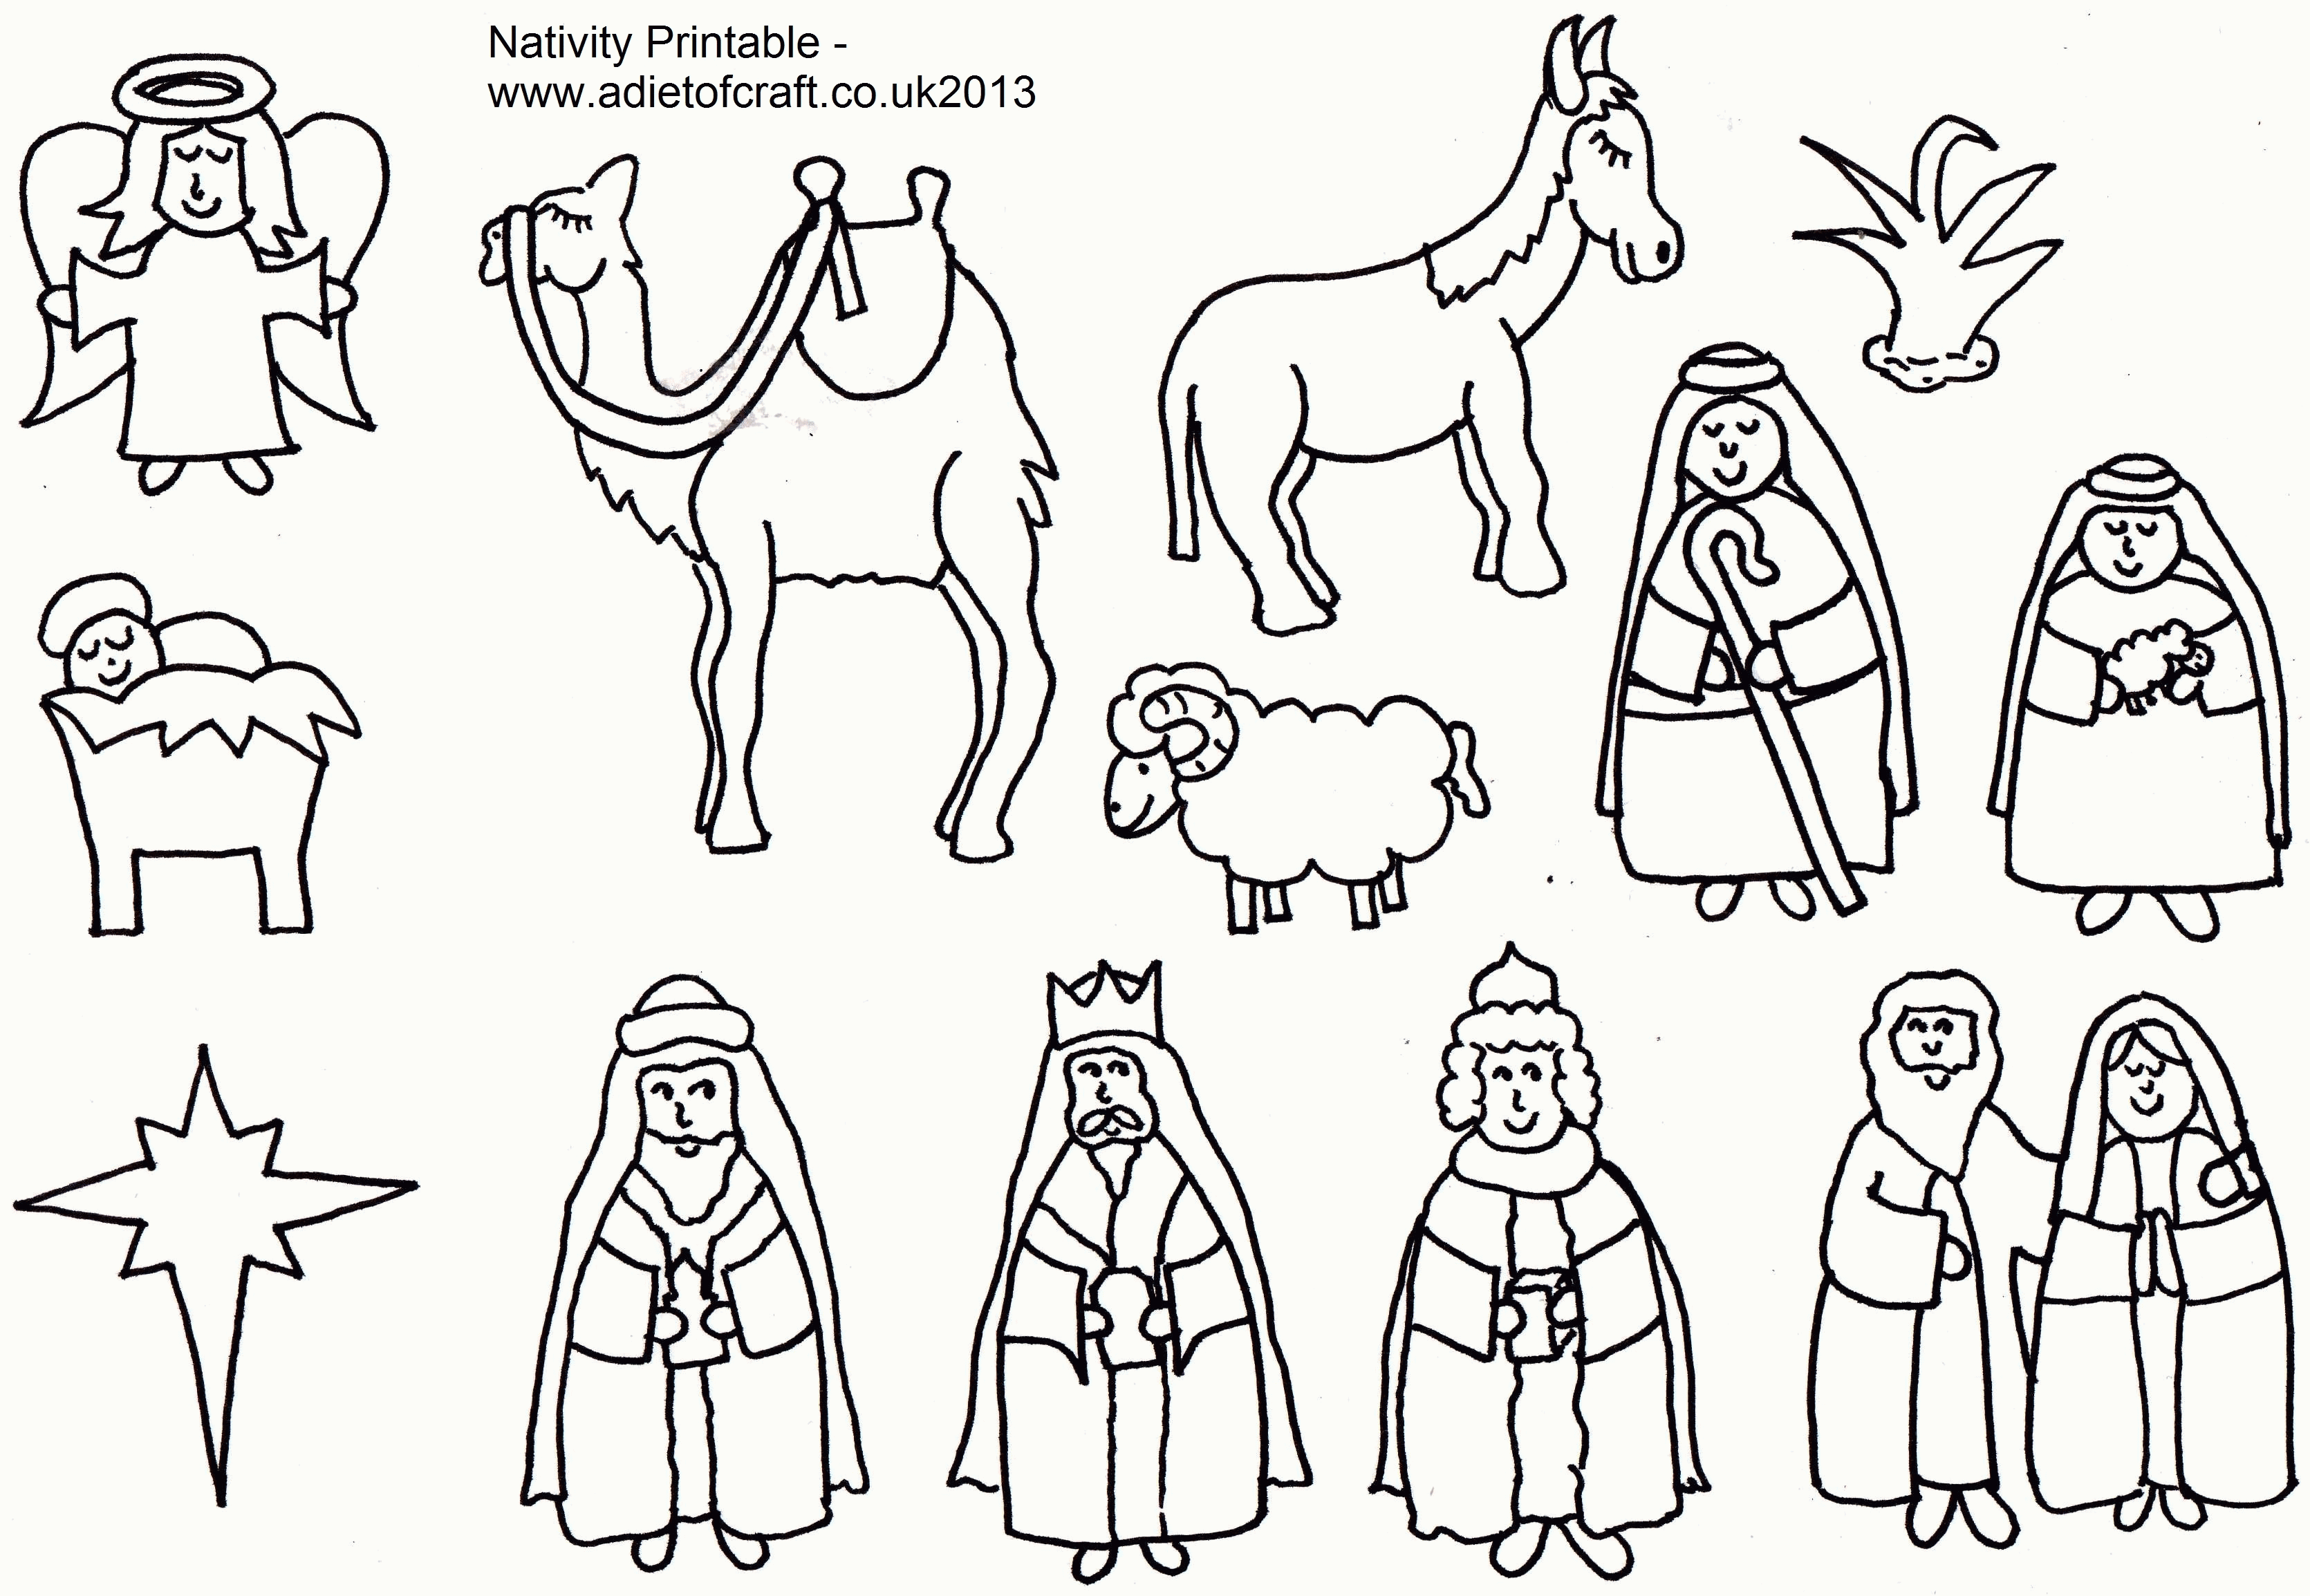 nativity pictures to color free Nativity coloring scene pages kids printable drawing simple scenes manger precious christmas moments cool2bkids color book jesus print character getcolorings